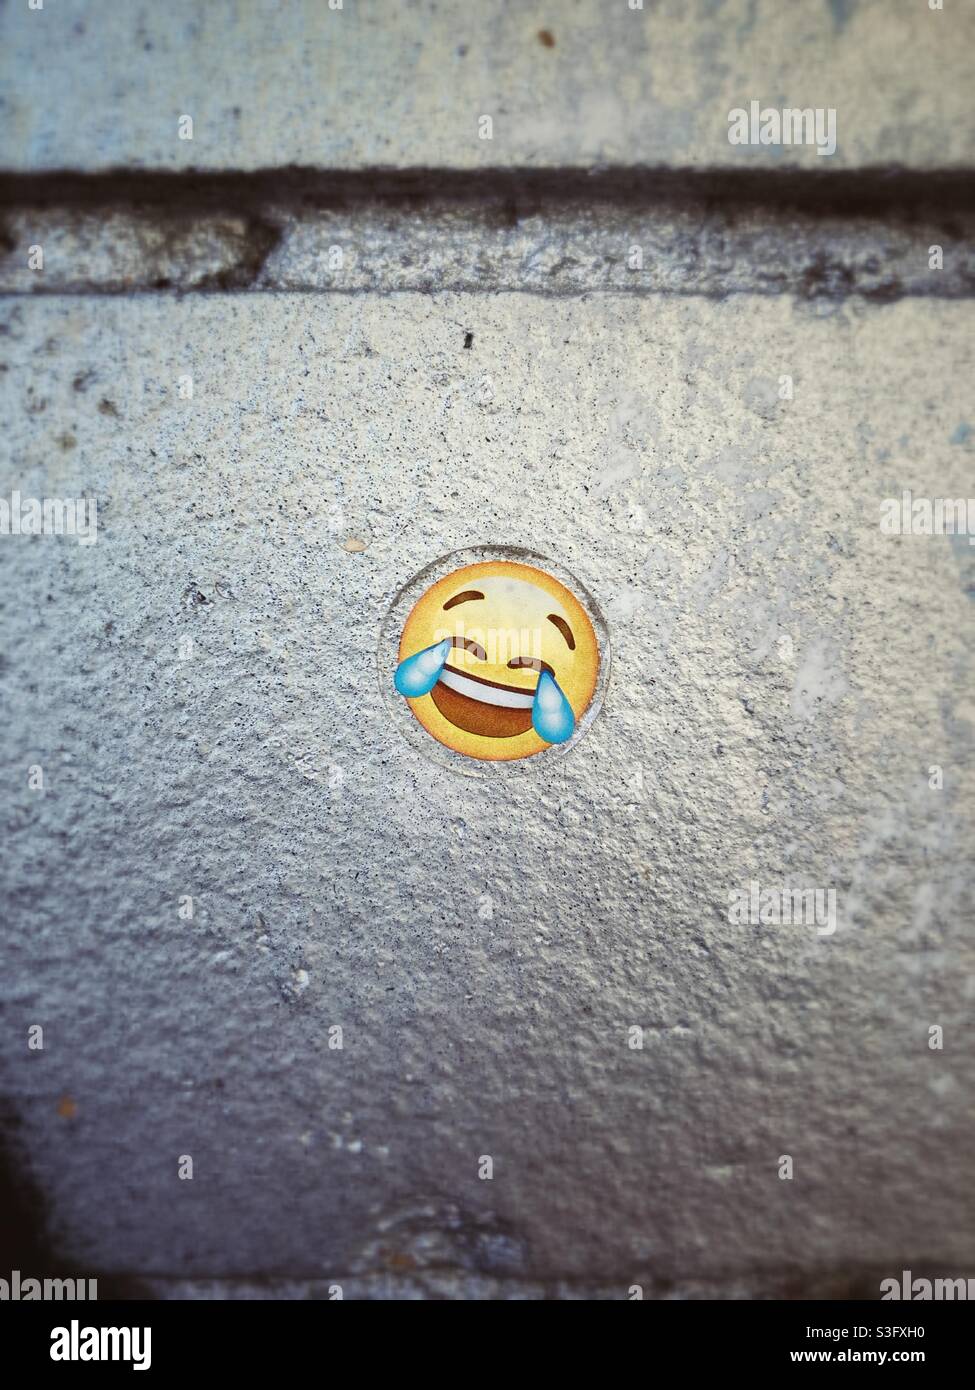 Laughing tears emoji sticker on a silver Wall Stock Photo